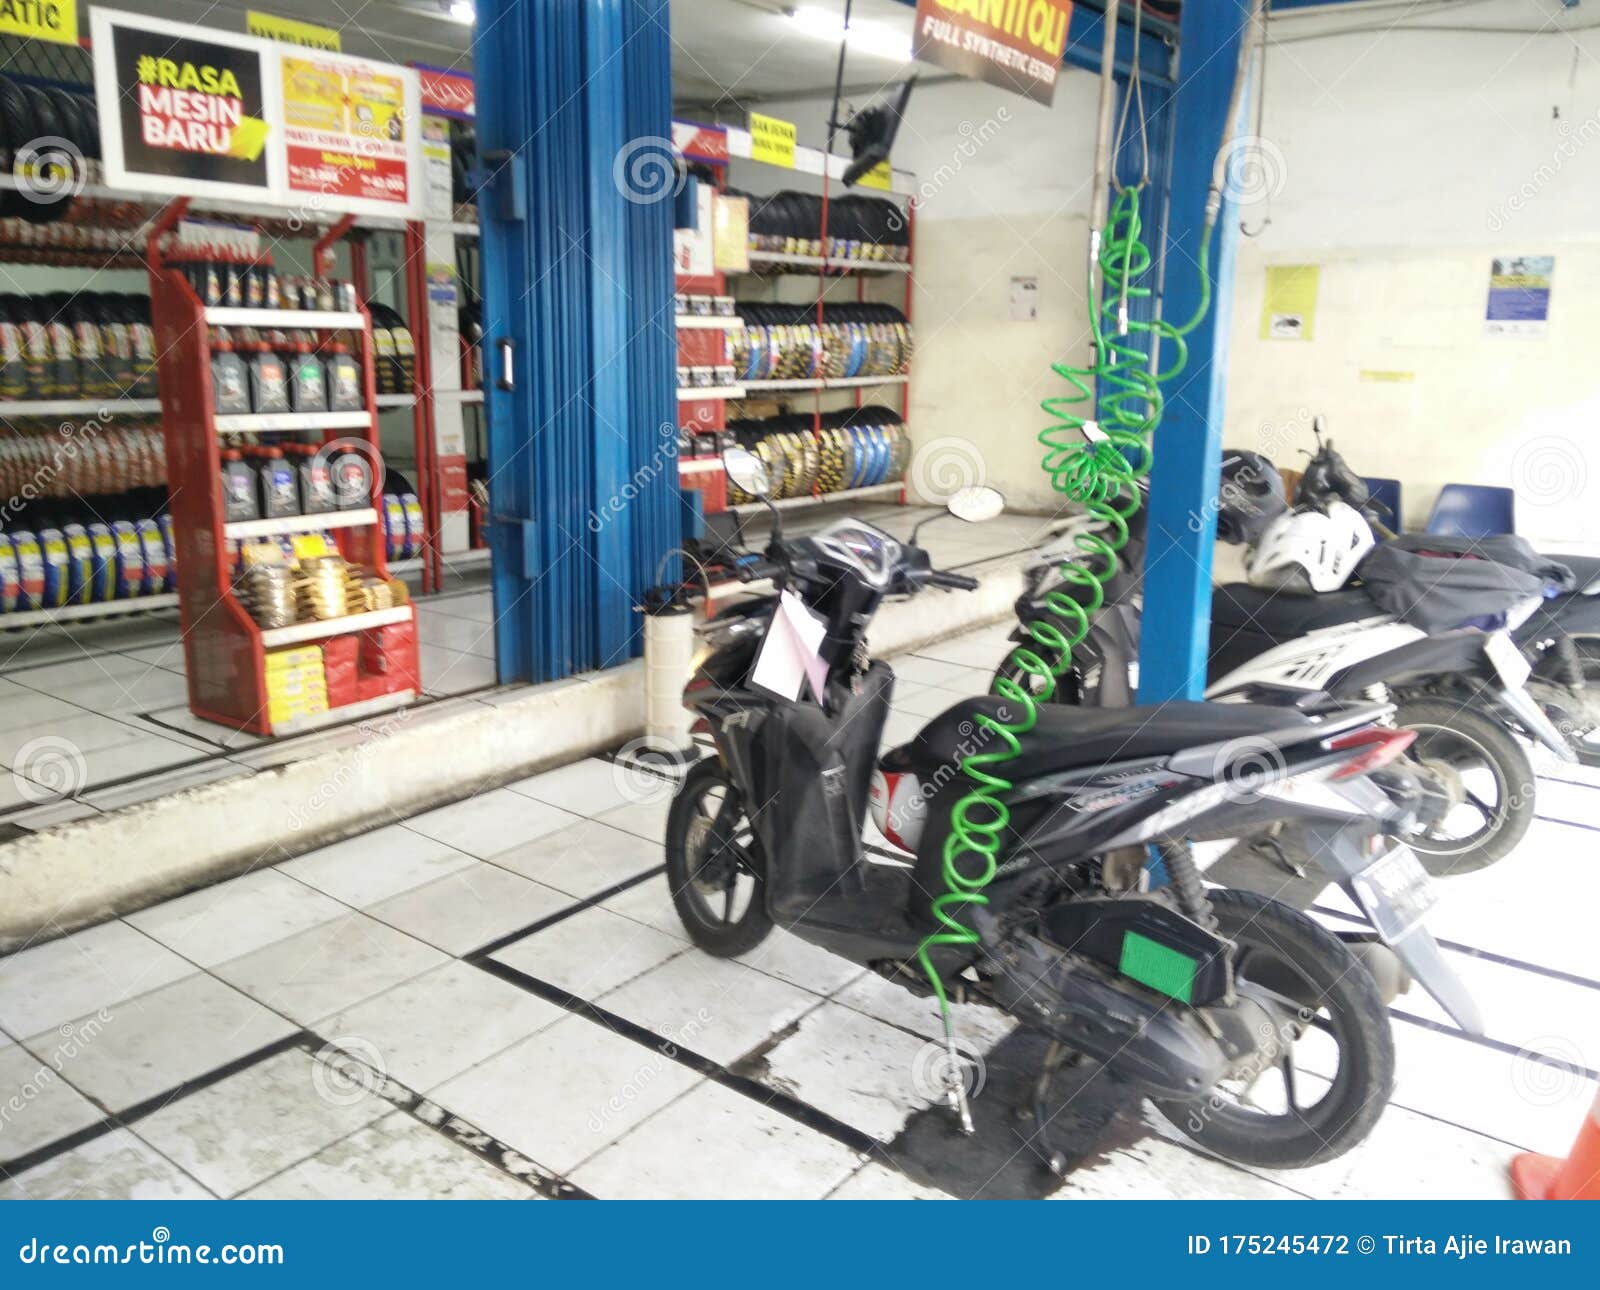 Jakarta Indonesia February 3 2020 Motorcycle In Line On Service Center Bengkel Motor During Rush Hours Editorial Photography Image Of 2020 Mechanic 175245472